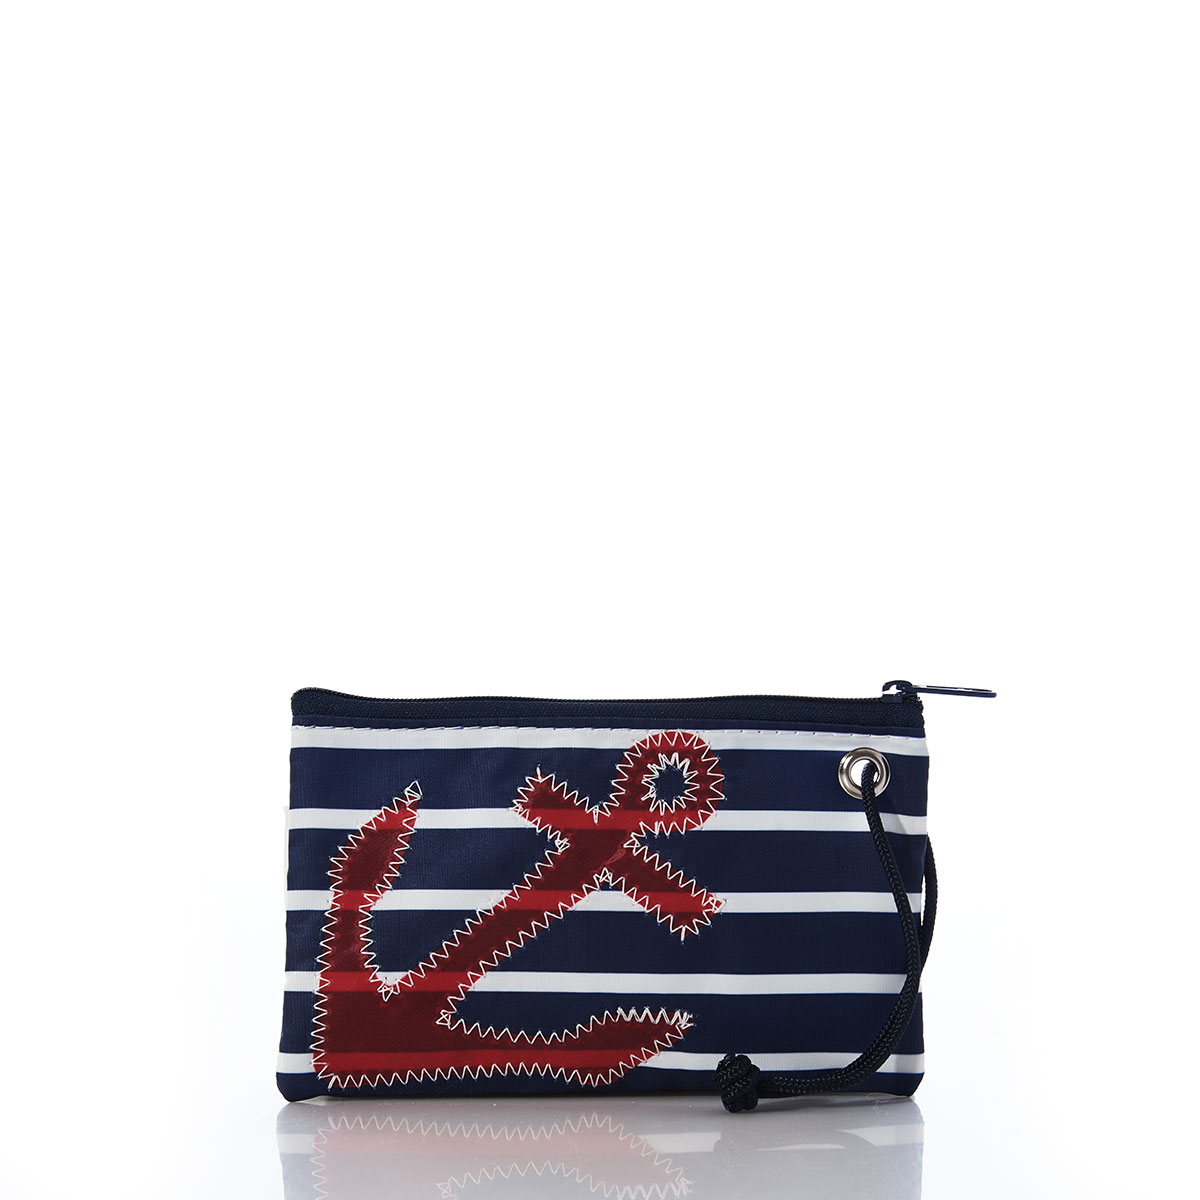 red anchor applique on navy and white stripes printed on recycled sail cloth wristlet with navy zipper and wristlet strap